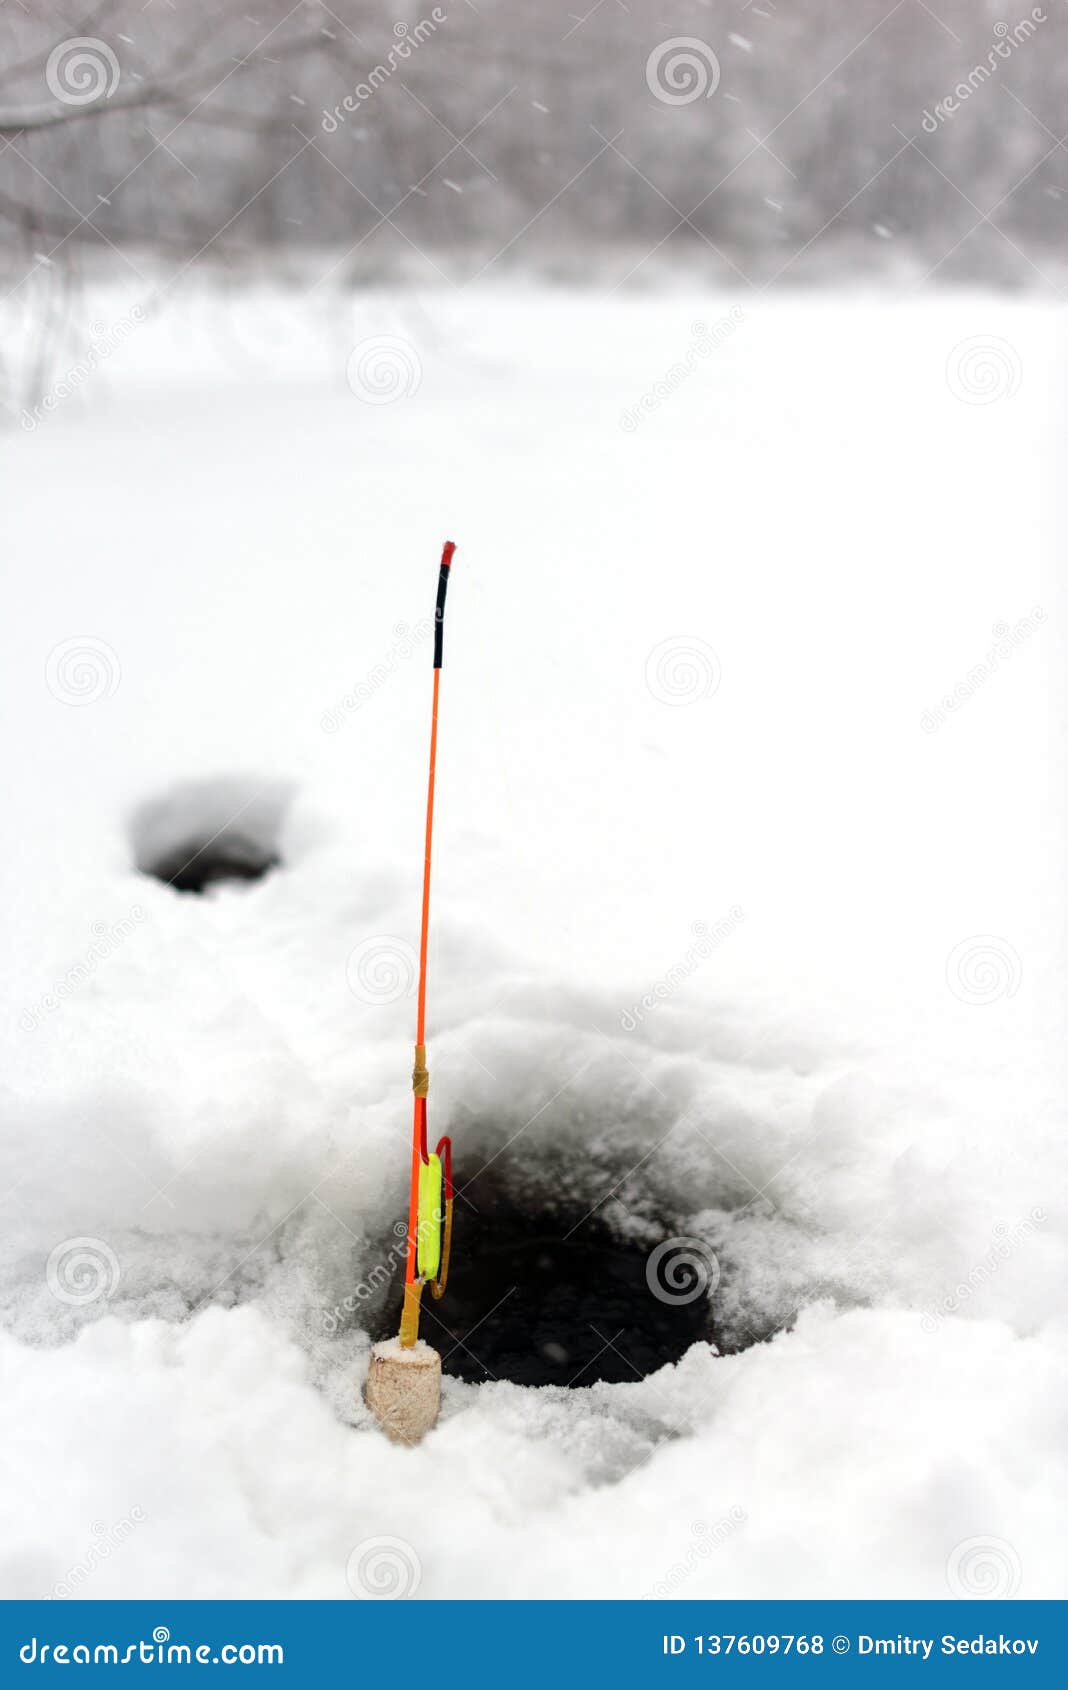 Homemade Winter Fishing Rod Stands at the Hole in the Ice of the